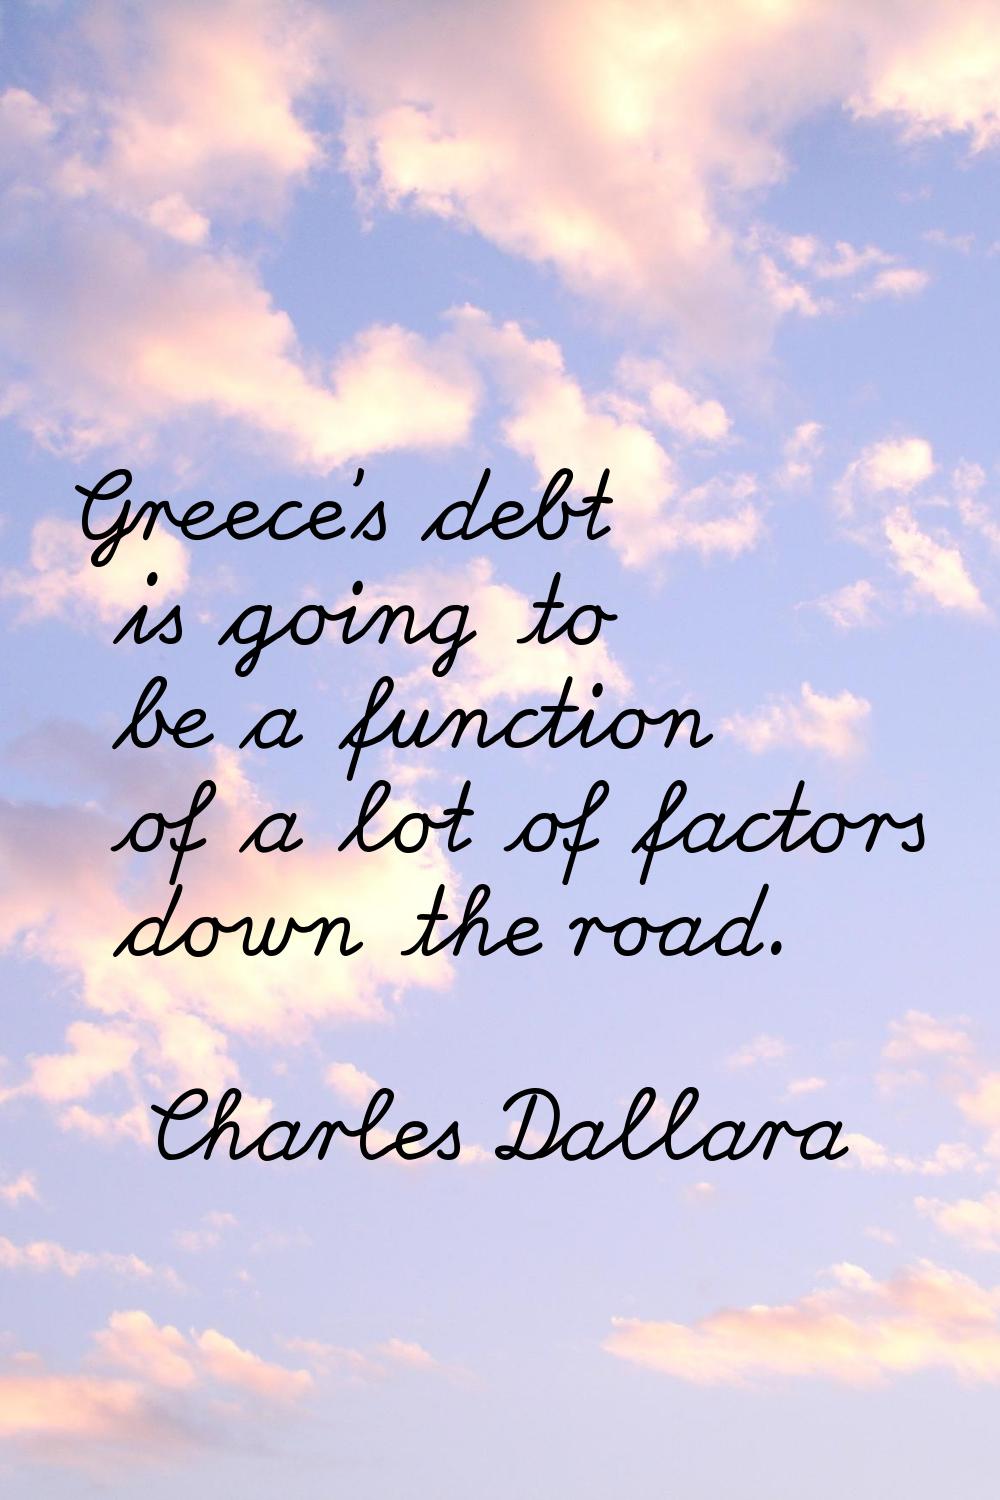 Greece's debt is going to be a function of a lot of factors down the road.